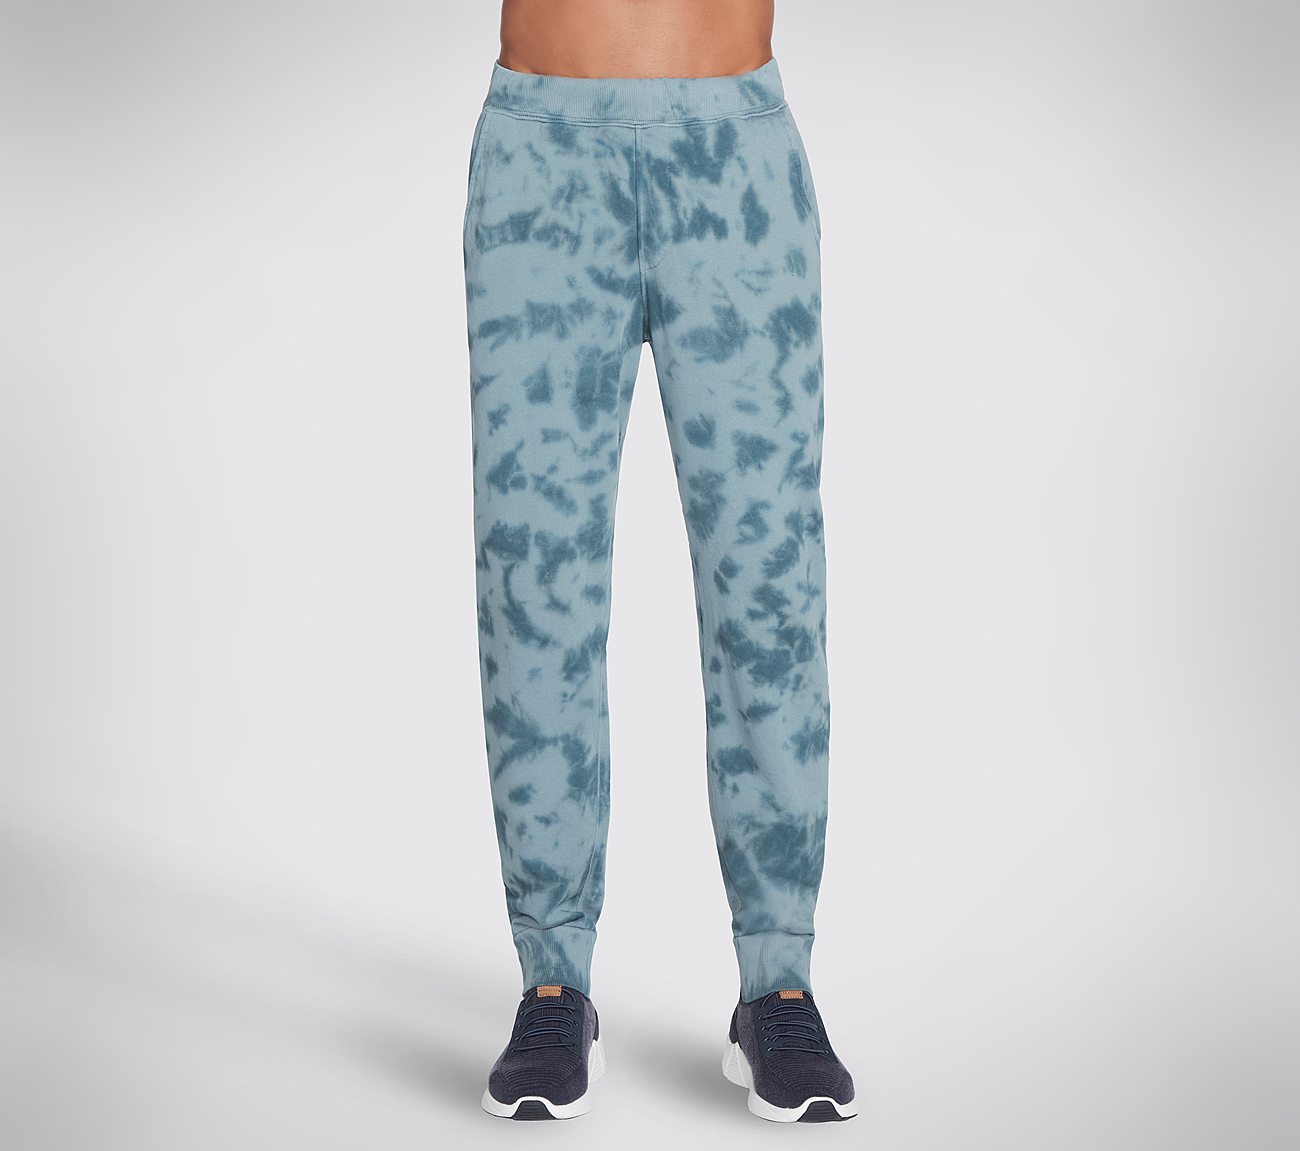 SKECHSWEATS DIAMOND DYE EXPED, BLUE/GREY Apparels Lateral View